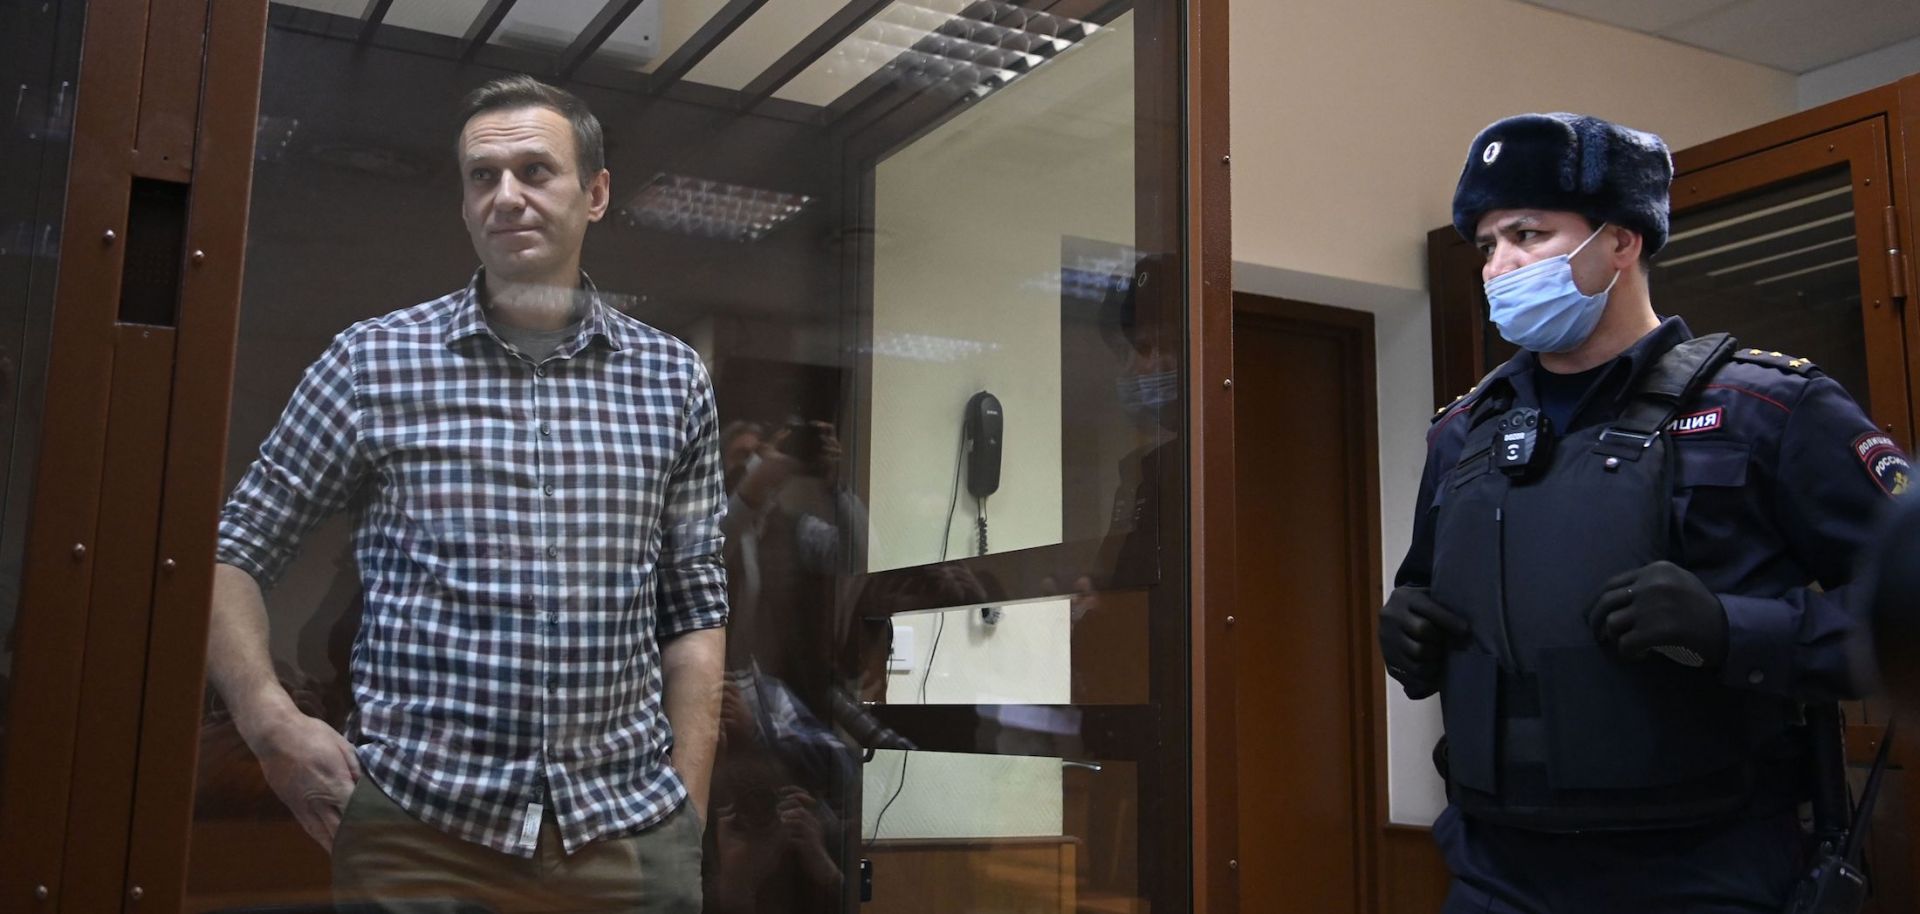 Russian opposition leader Alexei Navalny during a court hearing Feb. 20, 2021, in Moscow.